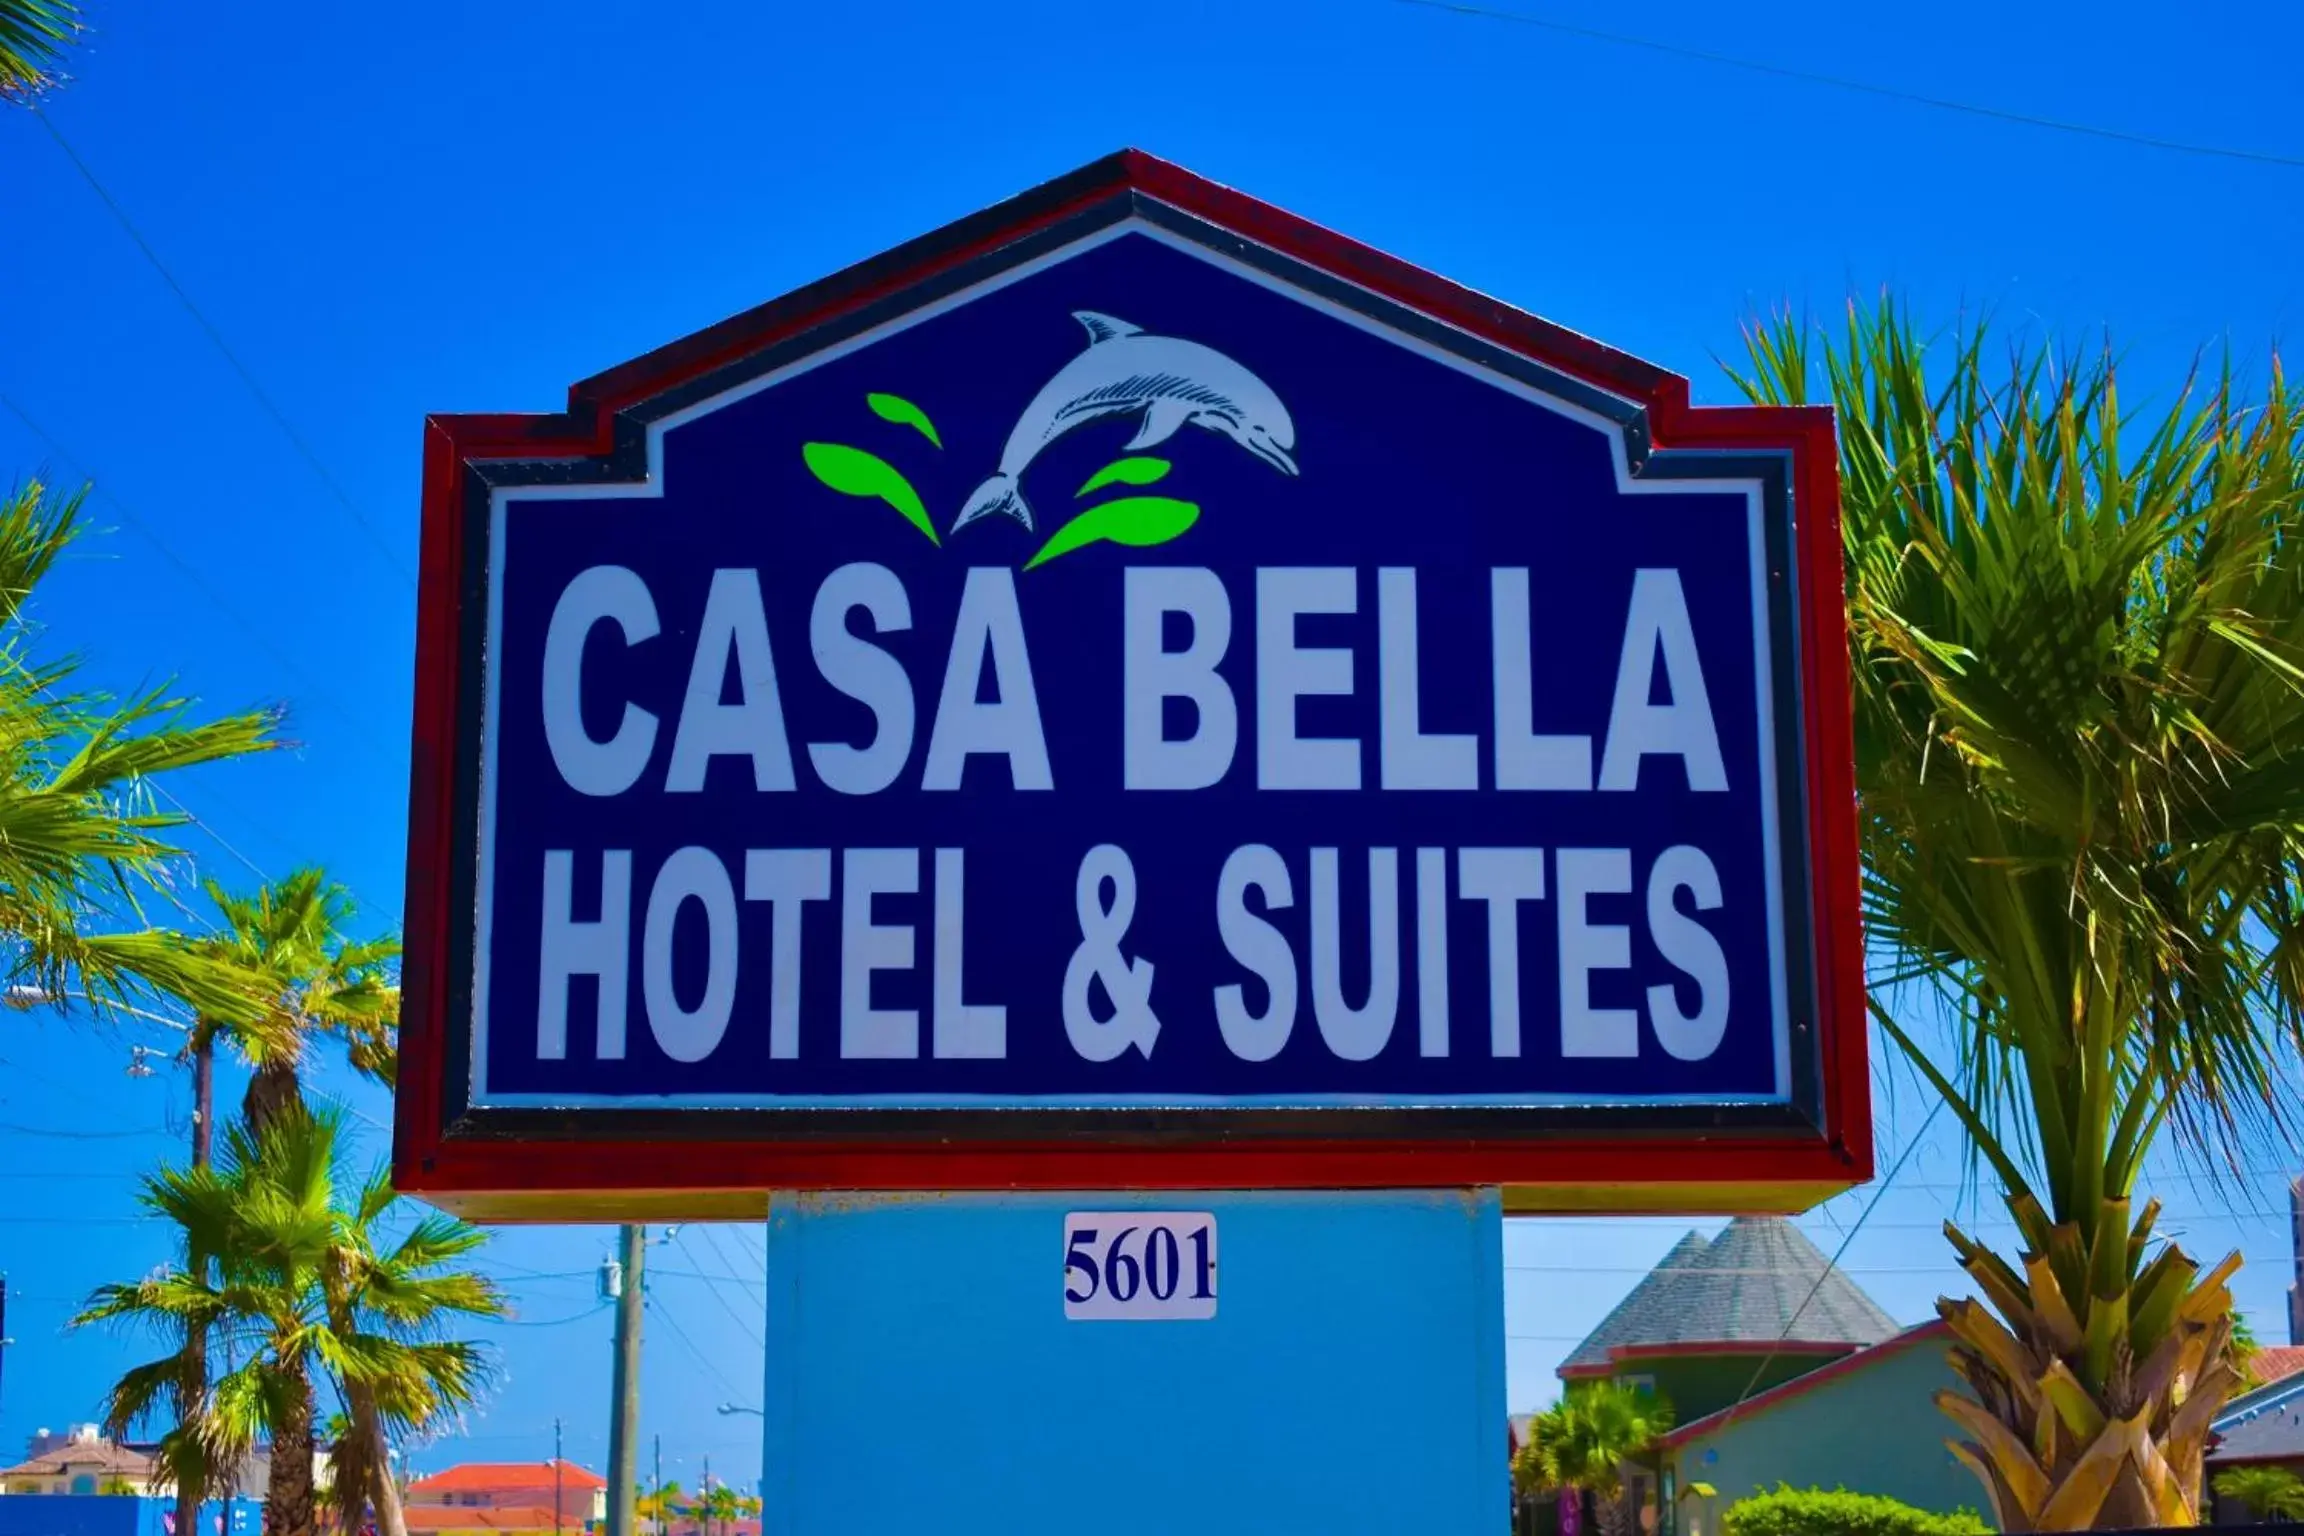 Property logo or sign, Property Logo/Sign in Casa Bella Hotel and Suites